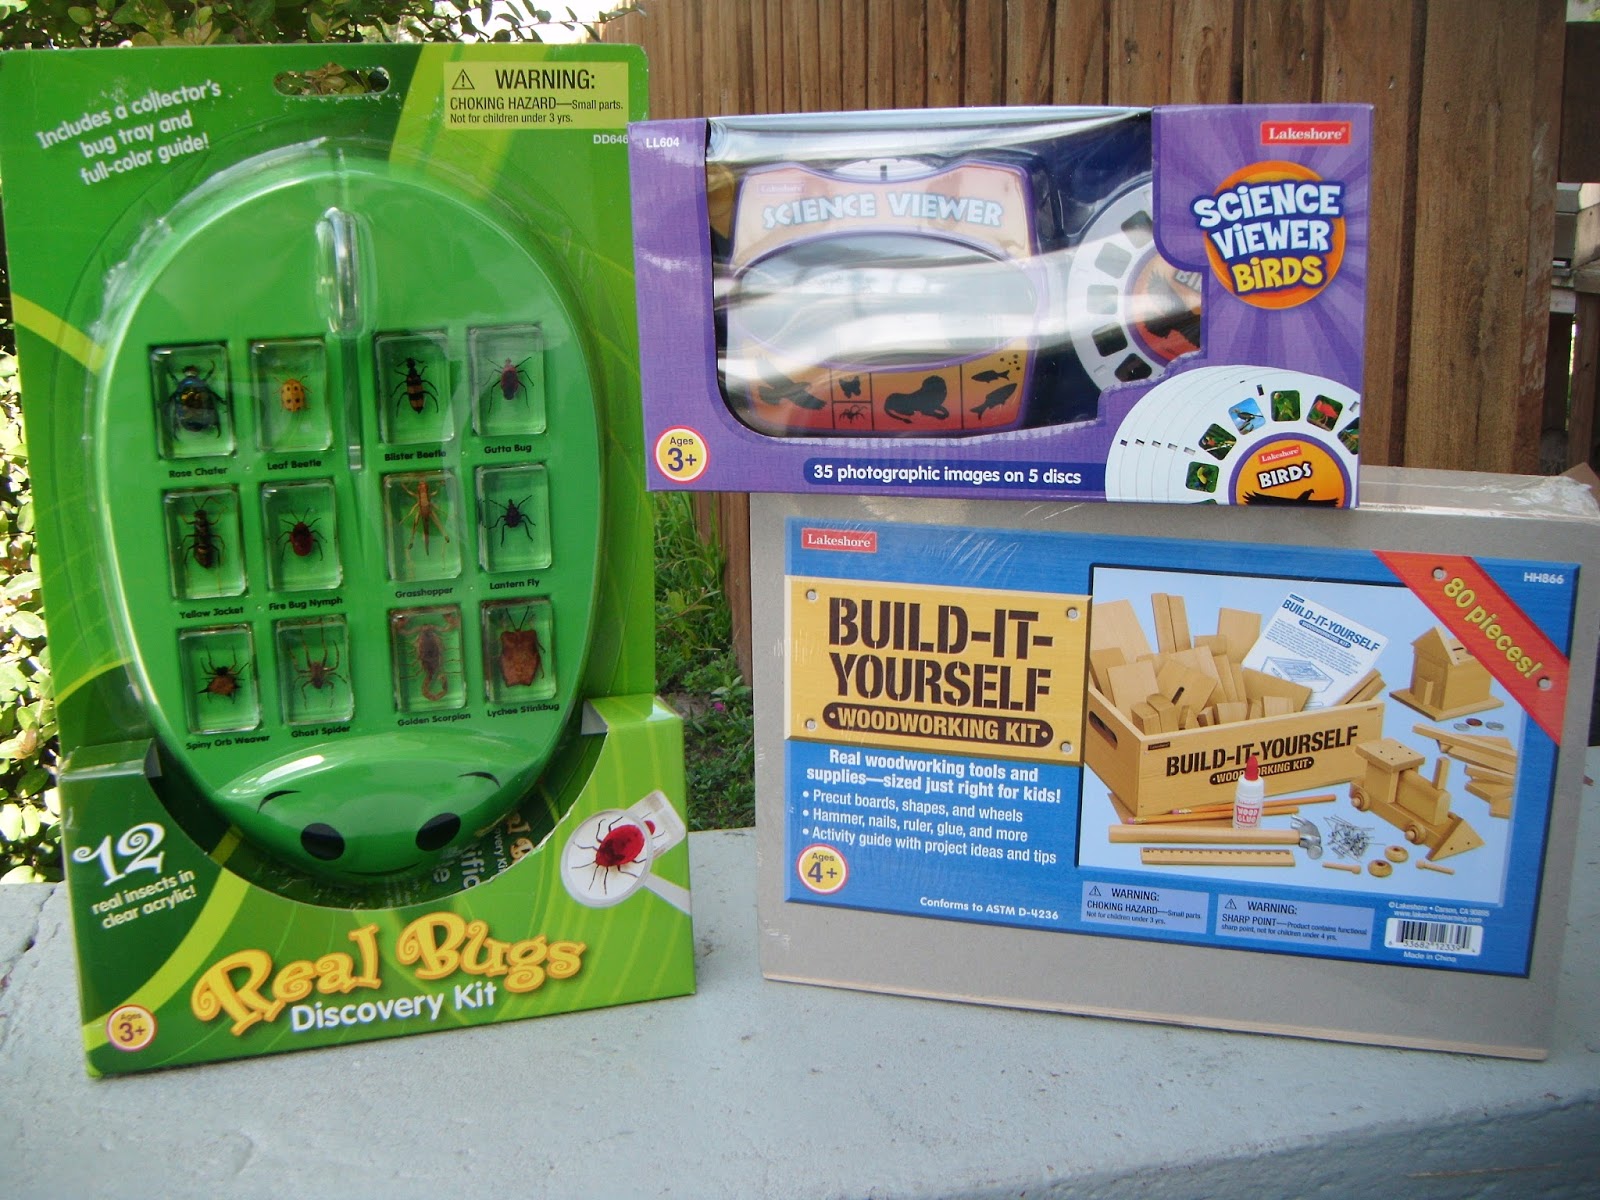 Lakeshore Build-It-Yourself Woodworking Kit for Kids - toys